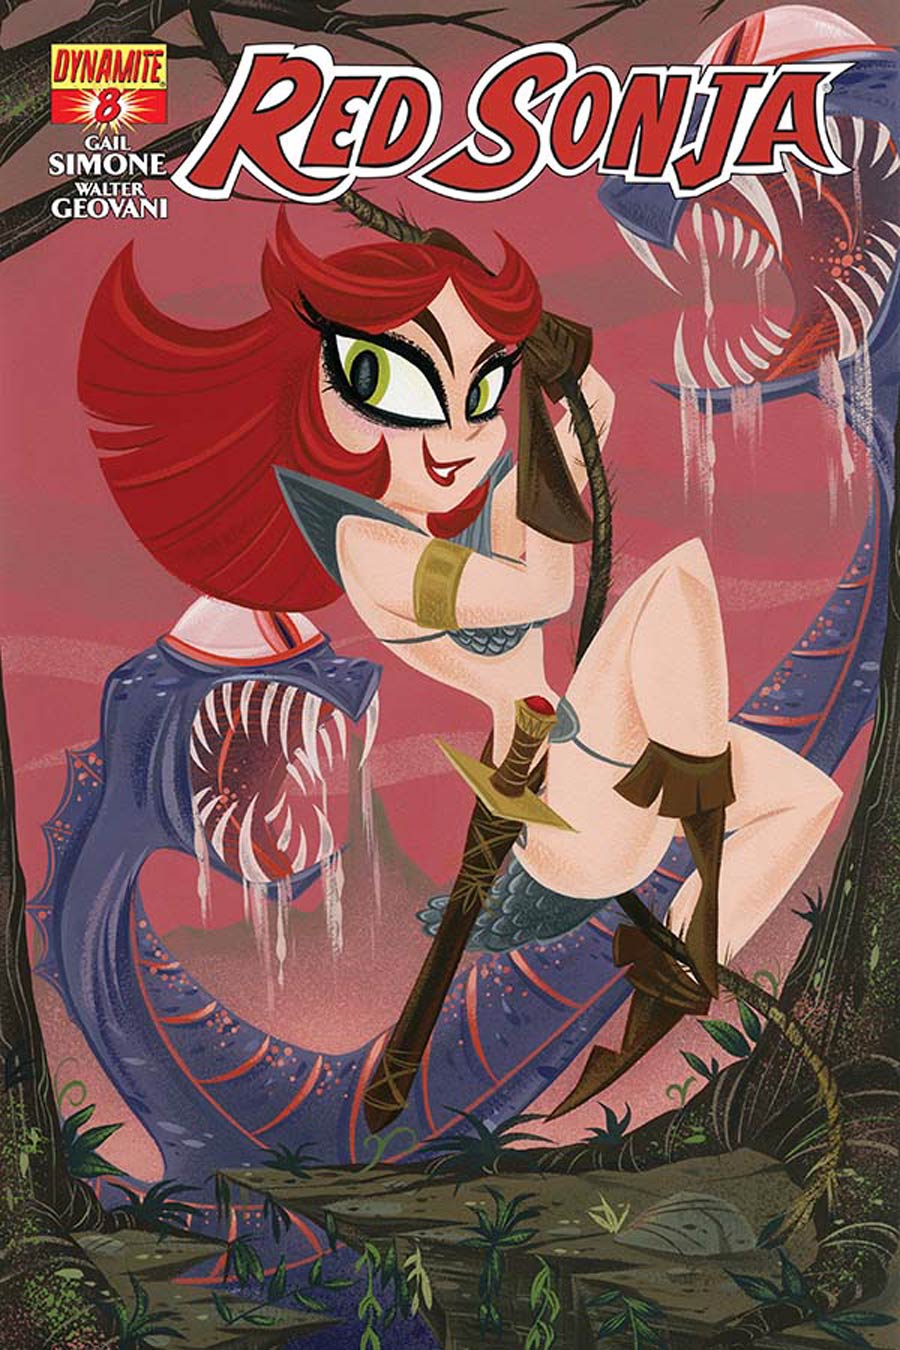 Red Sonja Vol 5 #8 Cover C Variant Stephanie Buscema Subscription Cover